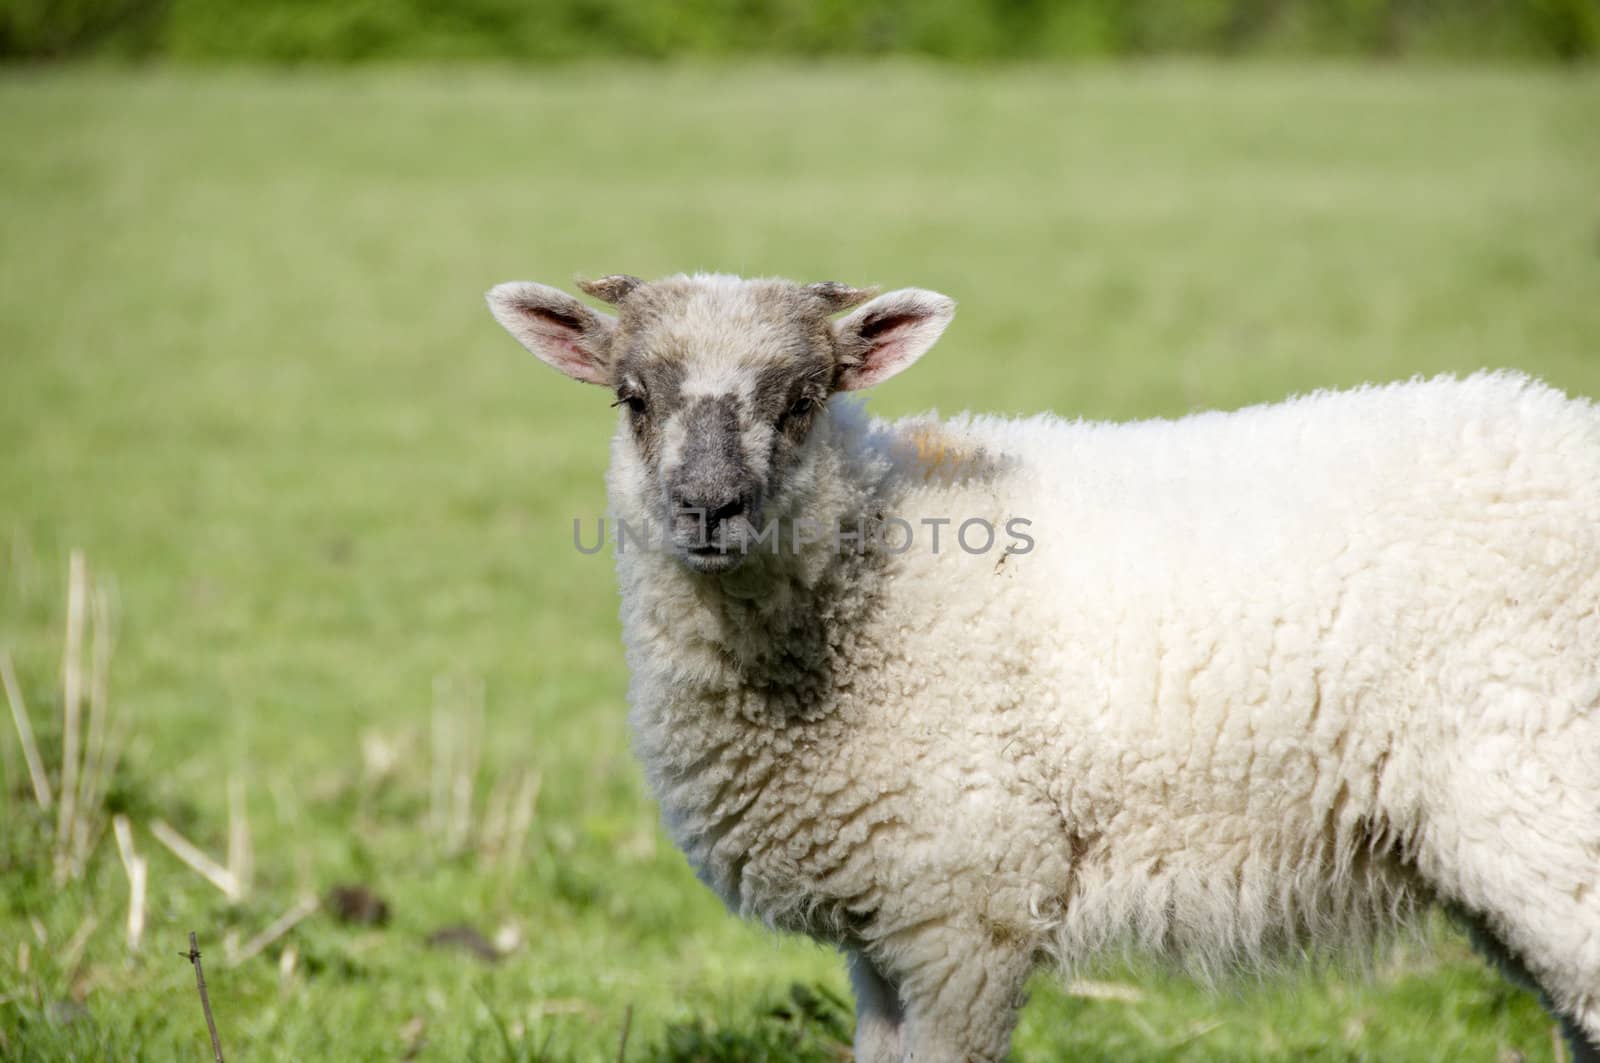 A lamb in a field in the sunshine